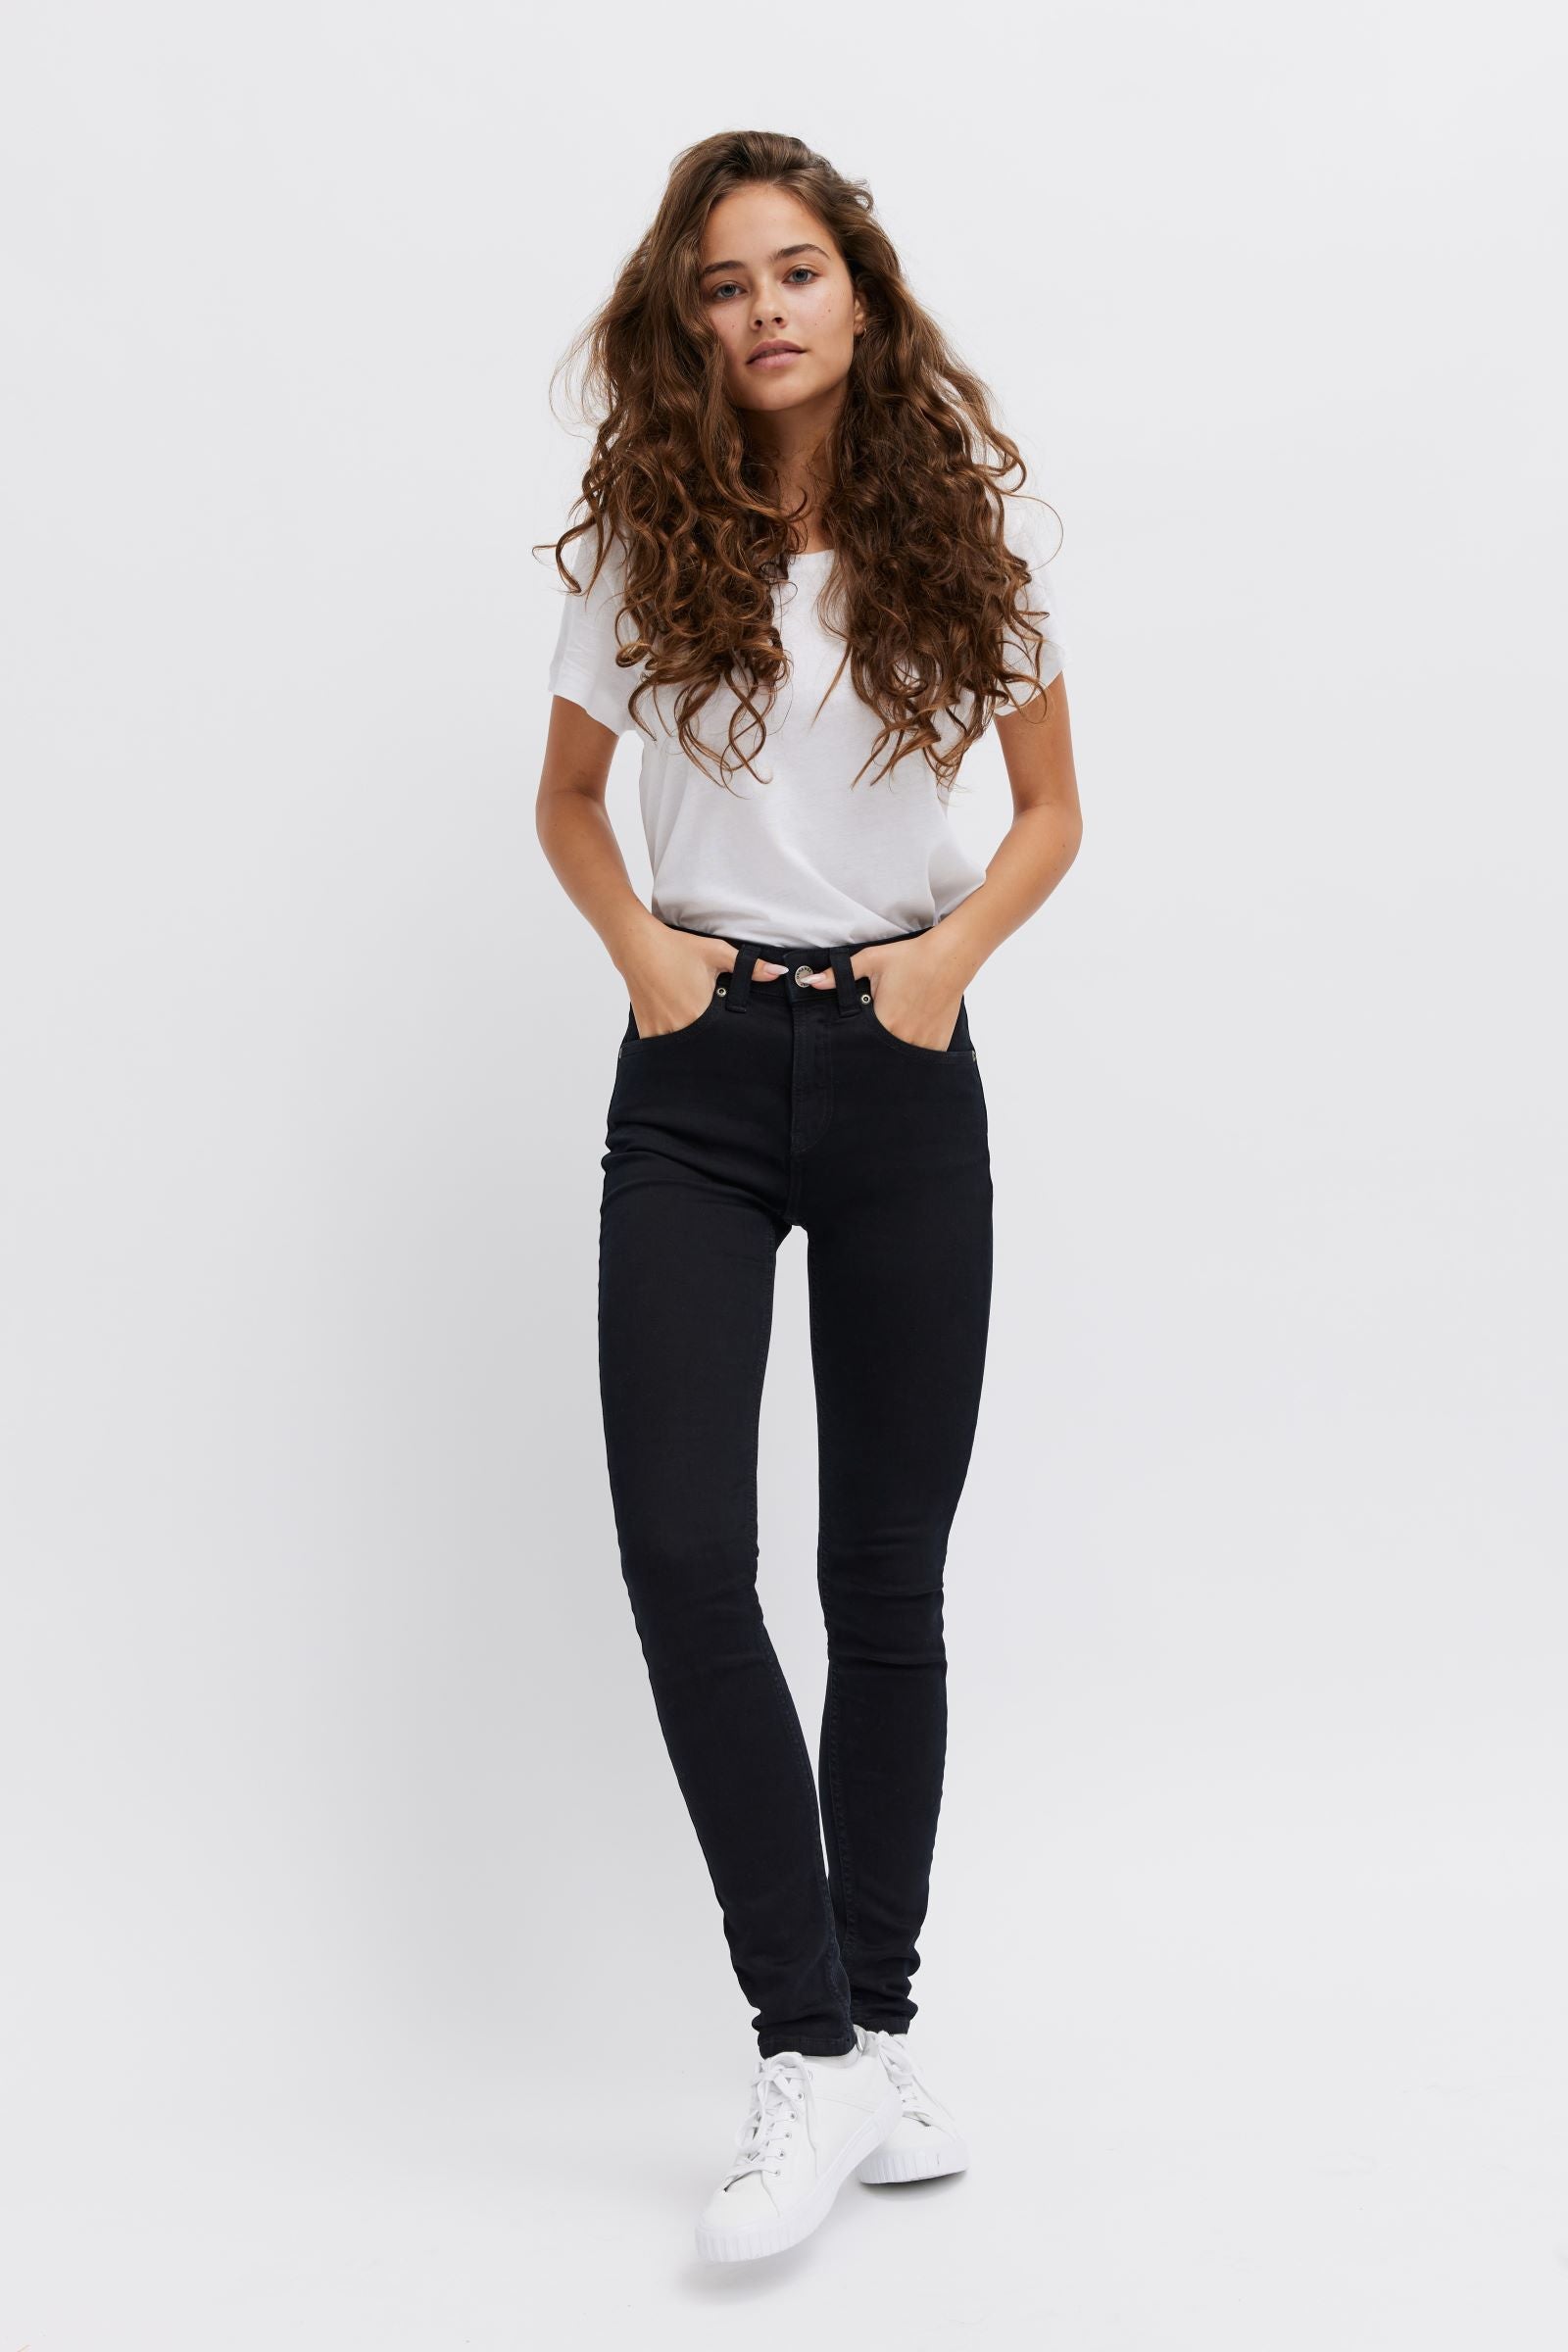 Best sustainable black jeans for women - Eco-friendly, vegan & organic fashion